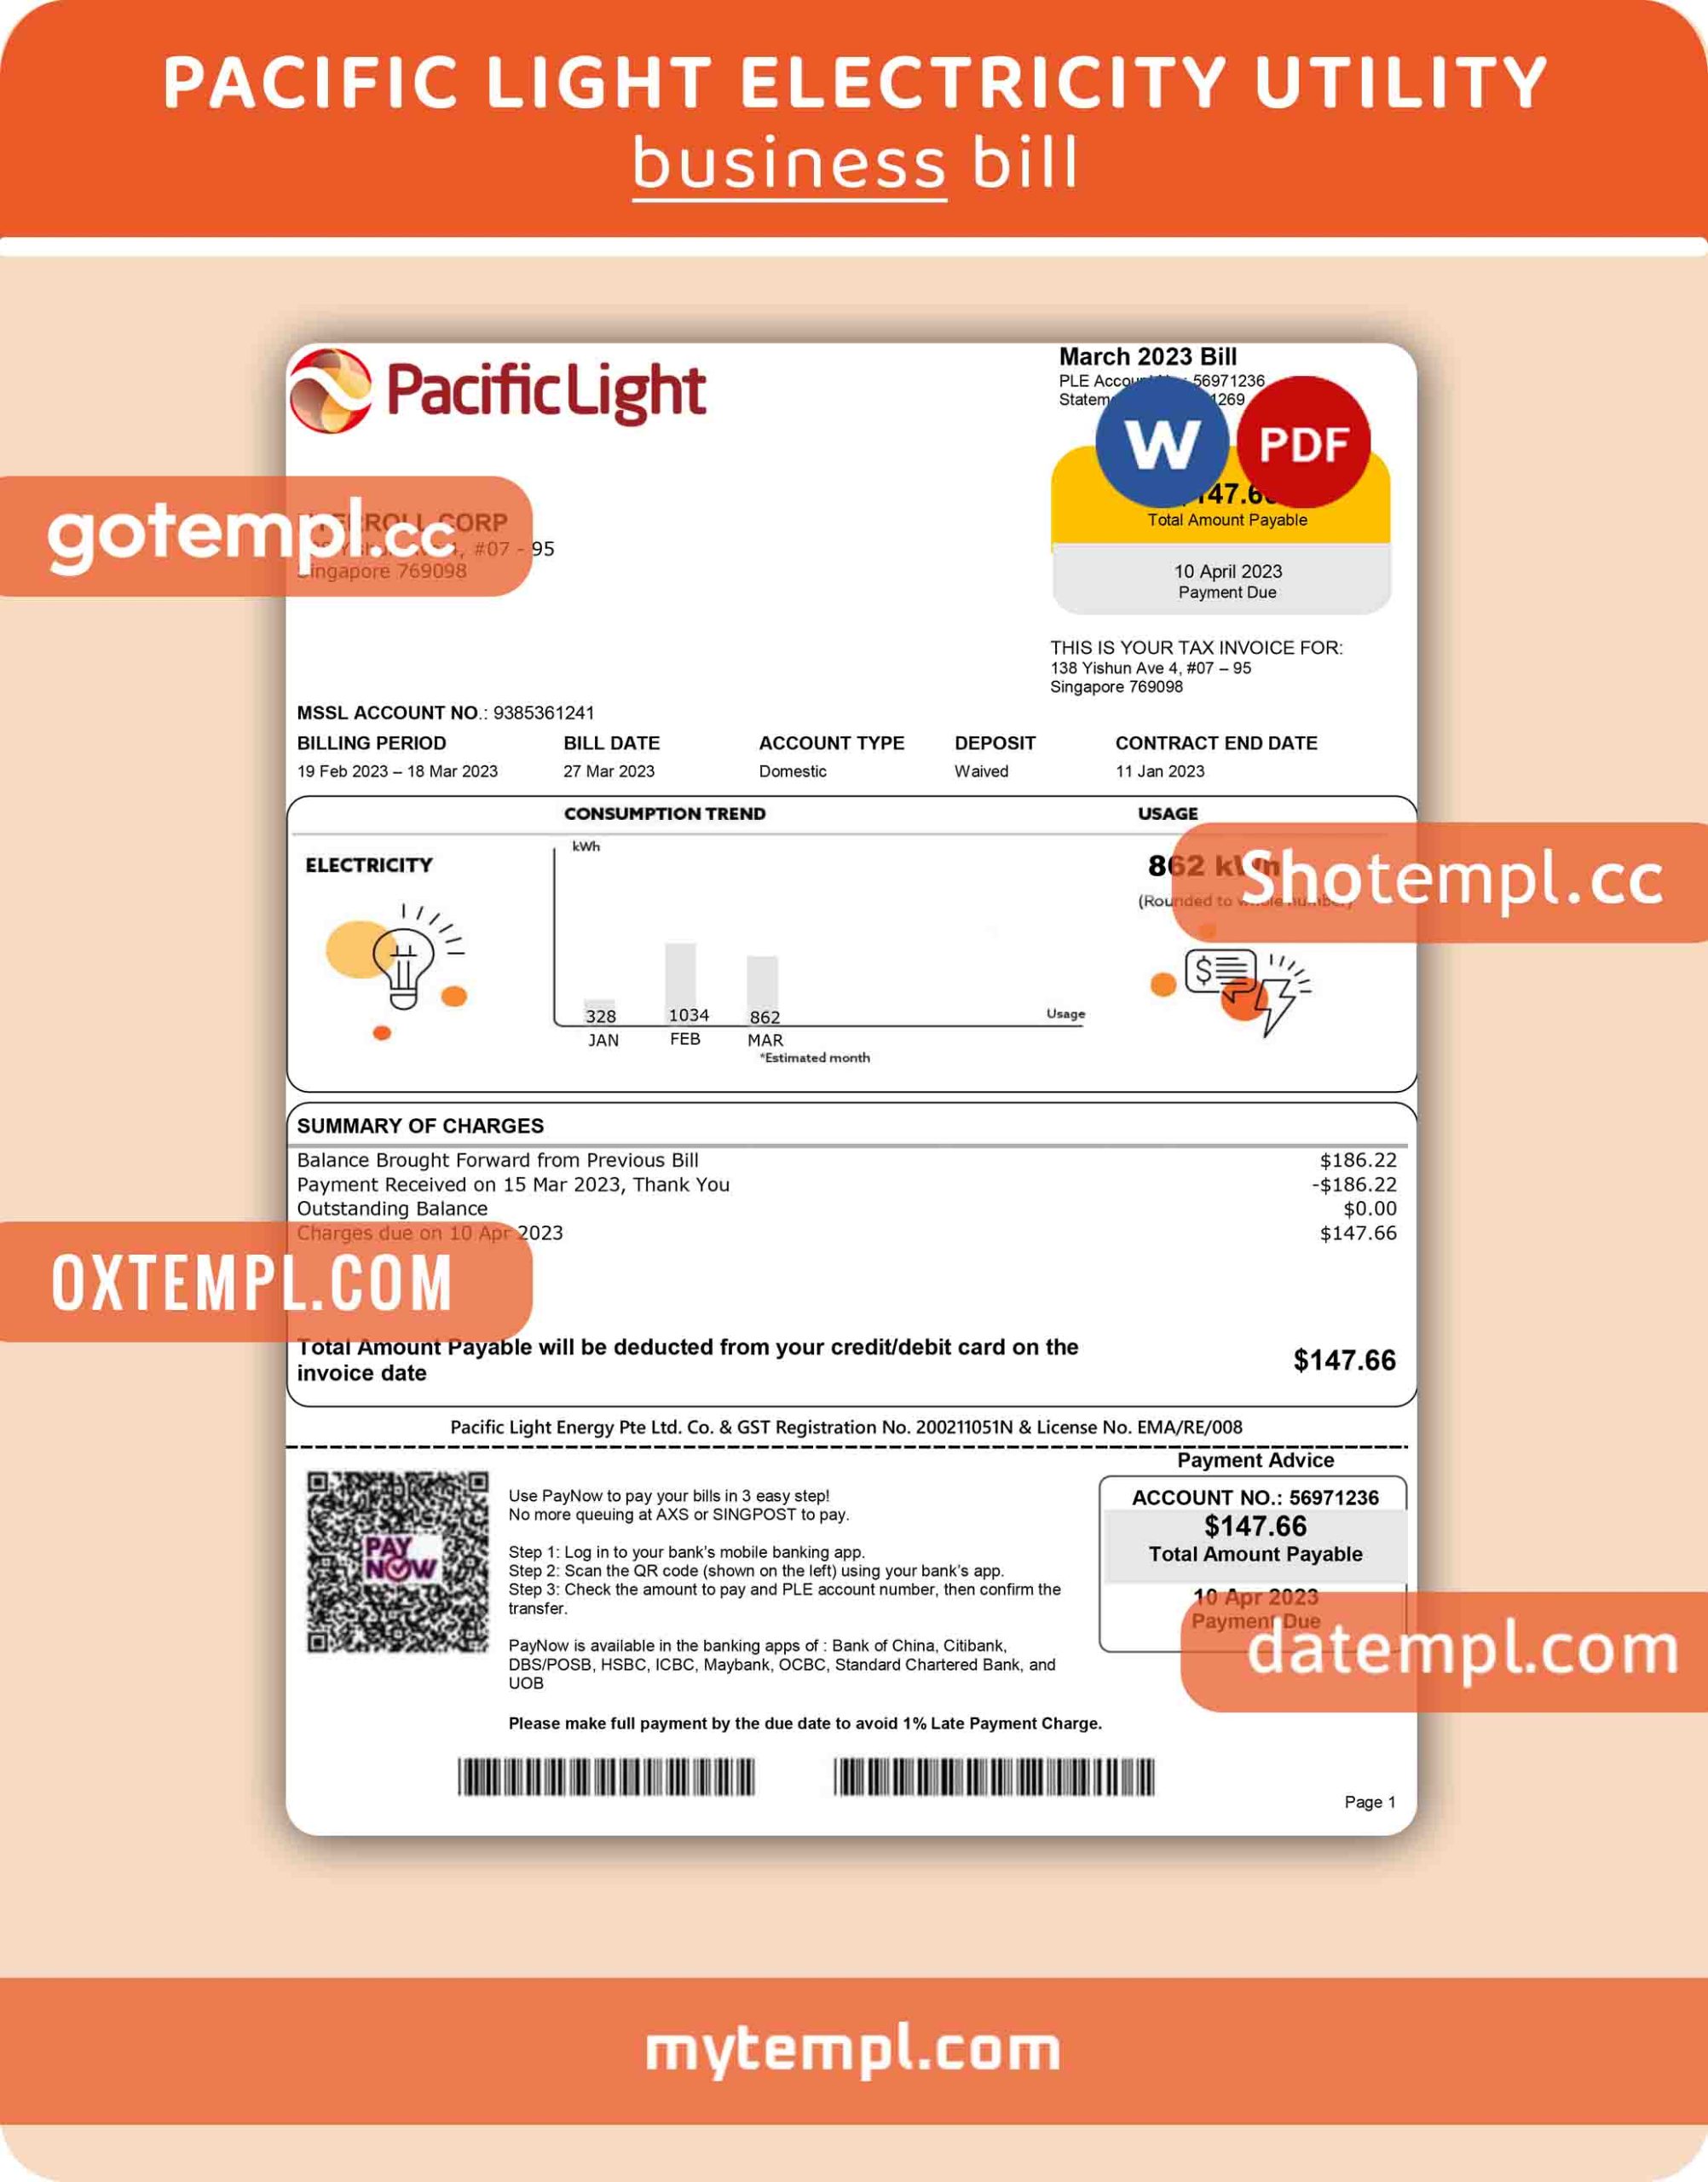 Pacific Light electricity business utility bill, Word and PDF template, 4 pages, version 3